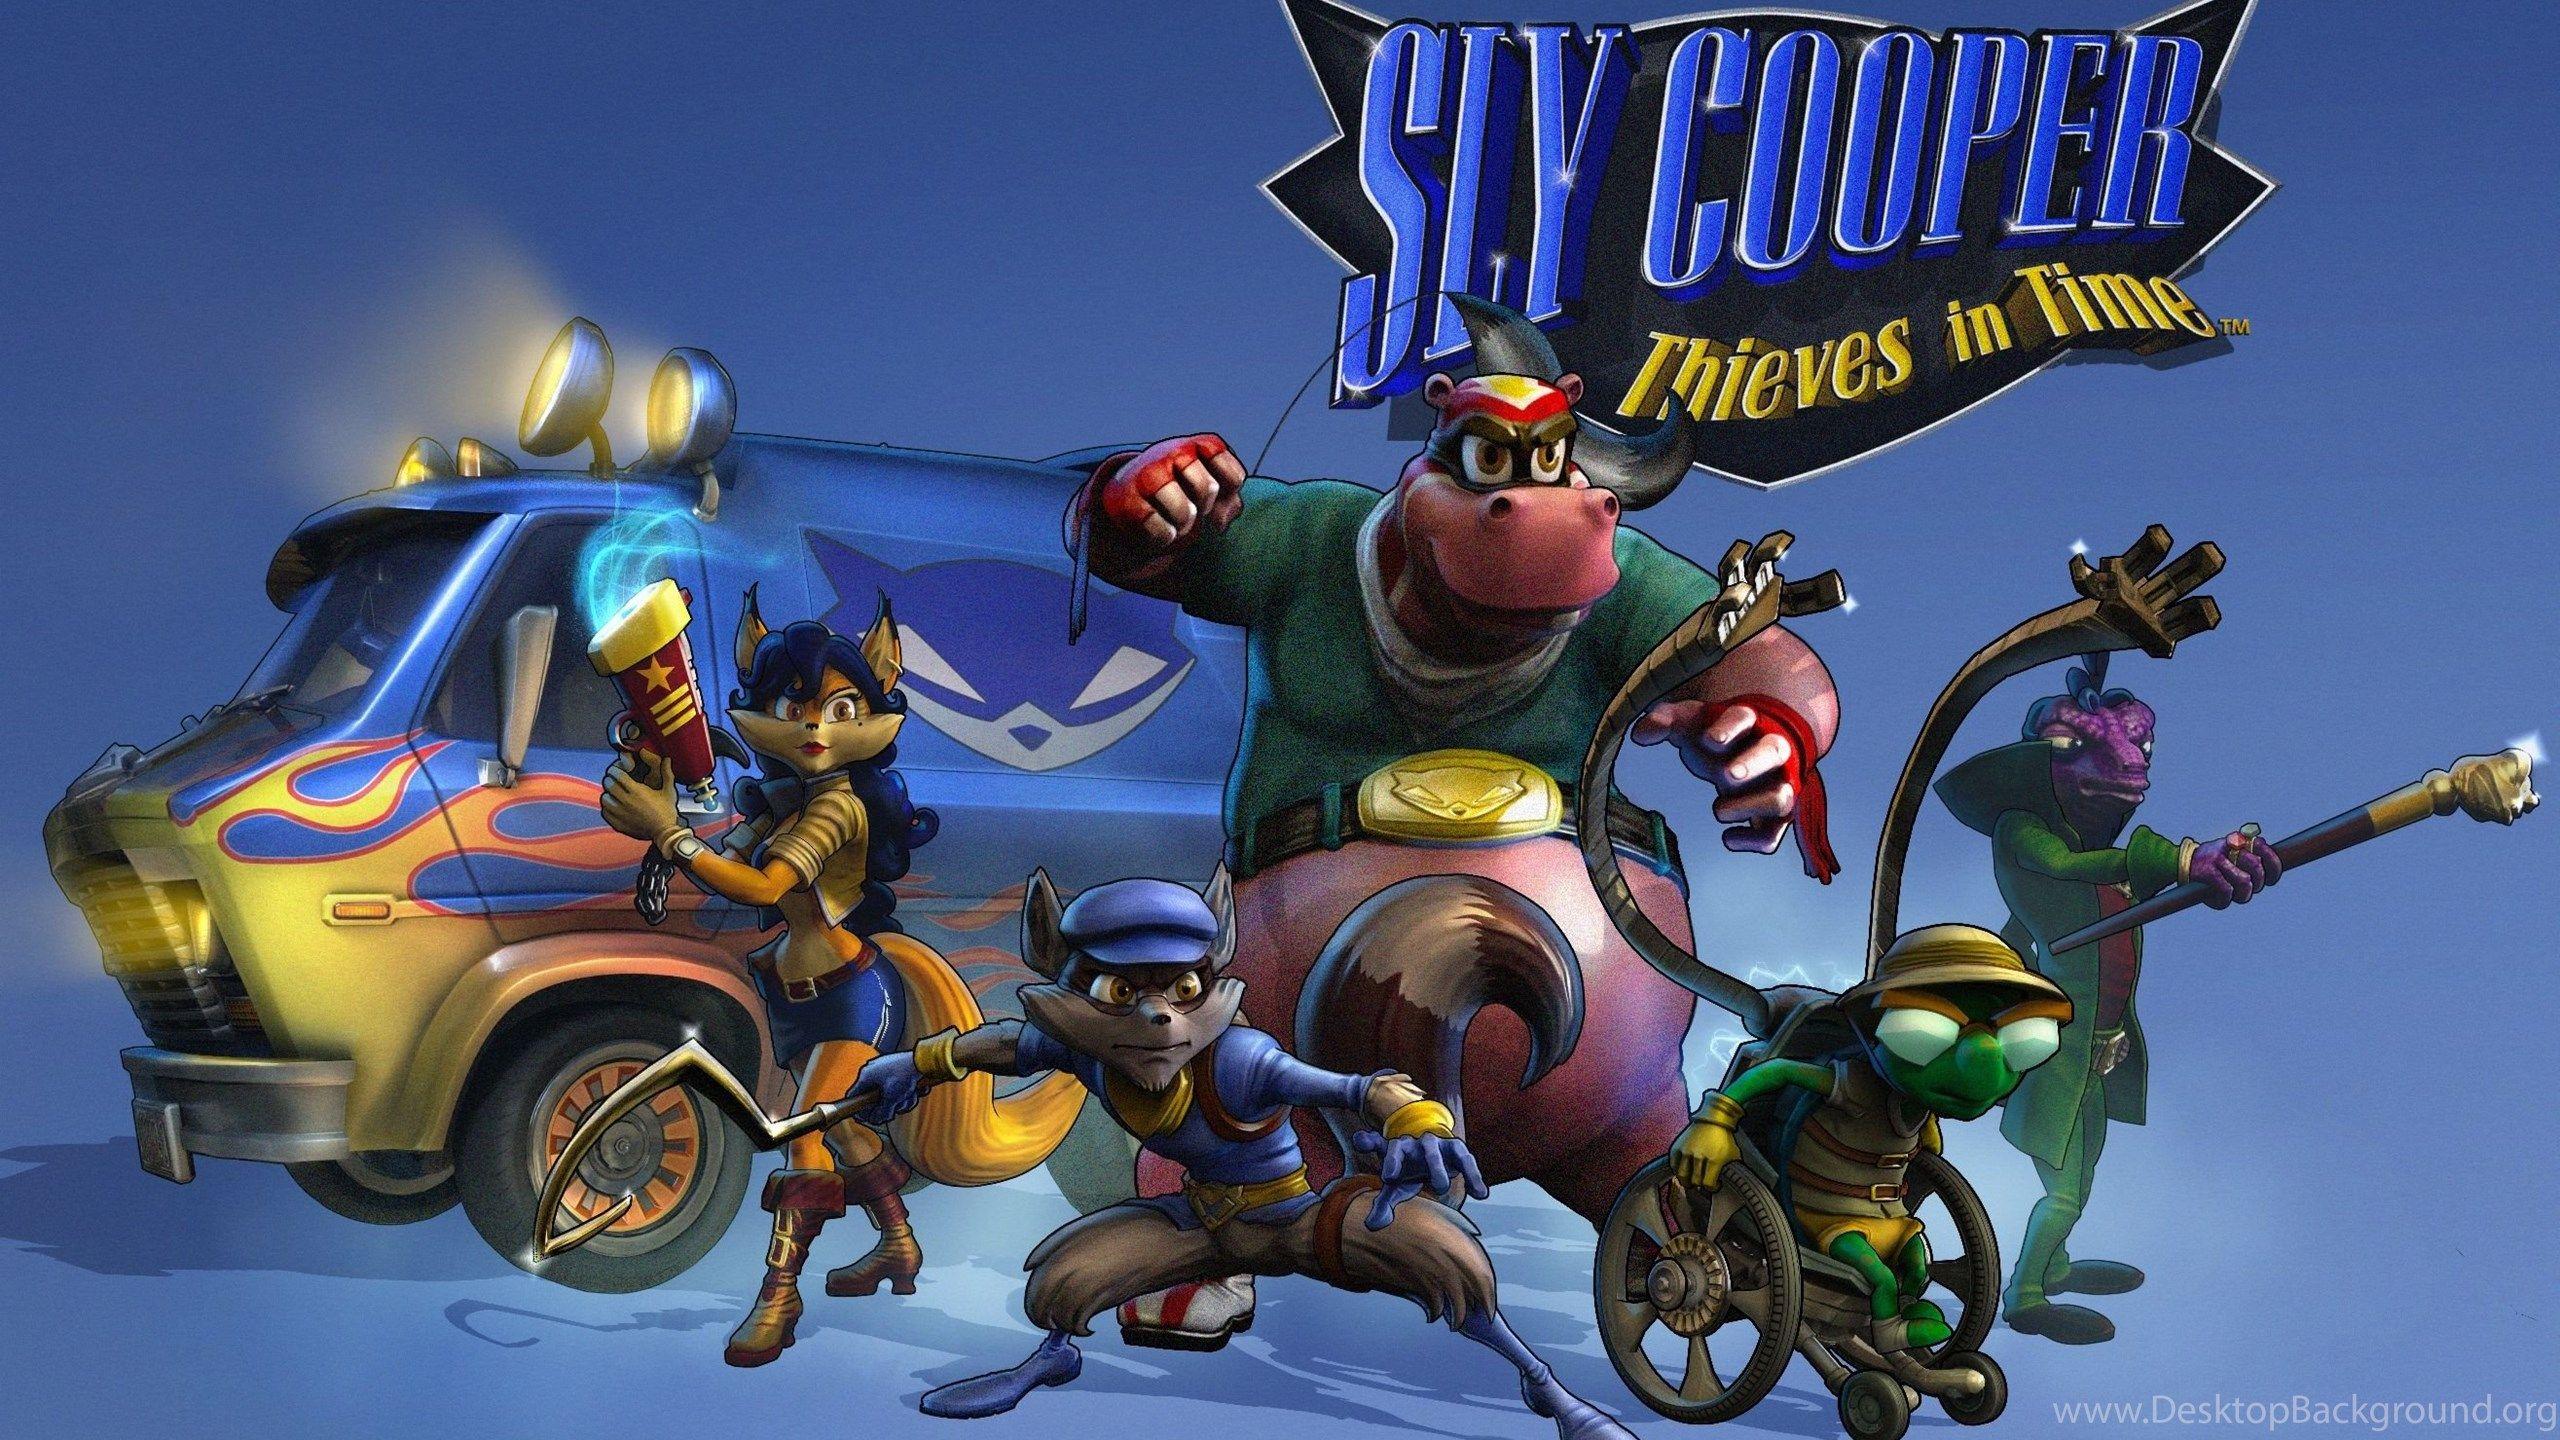 Sly Cooper Thieves in Time Wallpaper HD Desktop Background